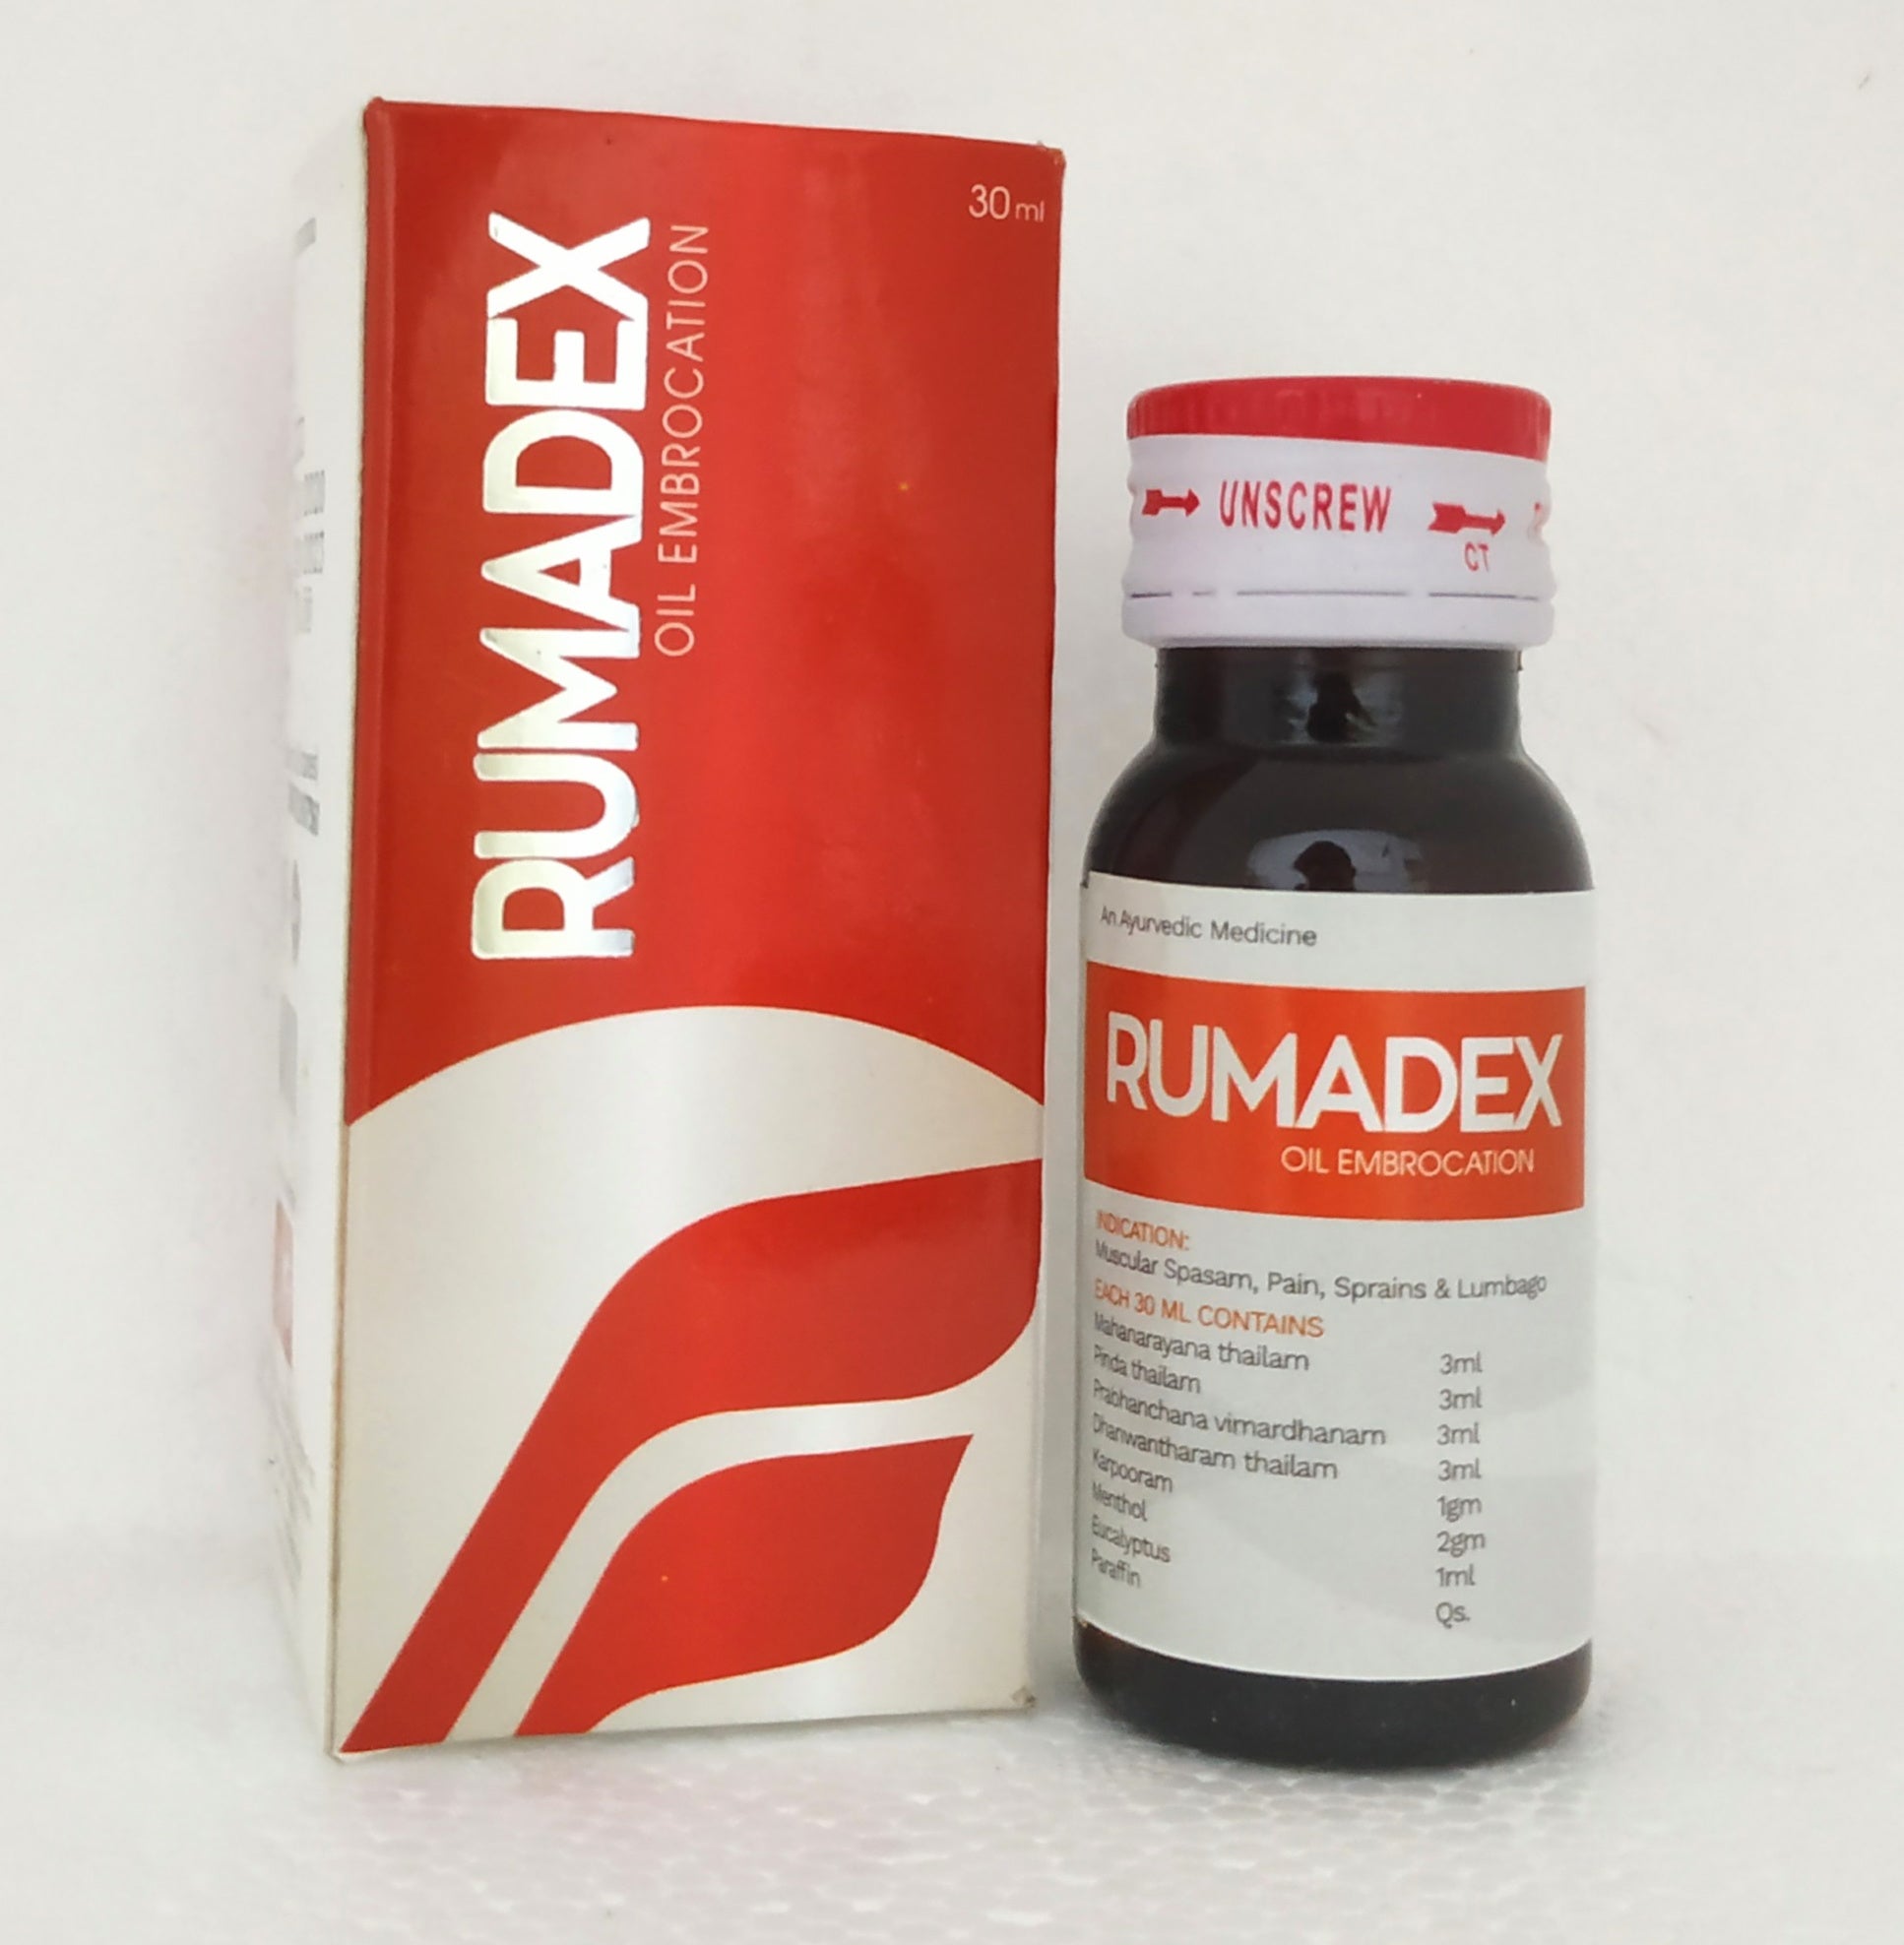 Shop Rumadex oil 30ml at price 80.00 from Fort Herbal Drugs Online - Ayush Care